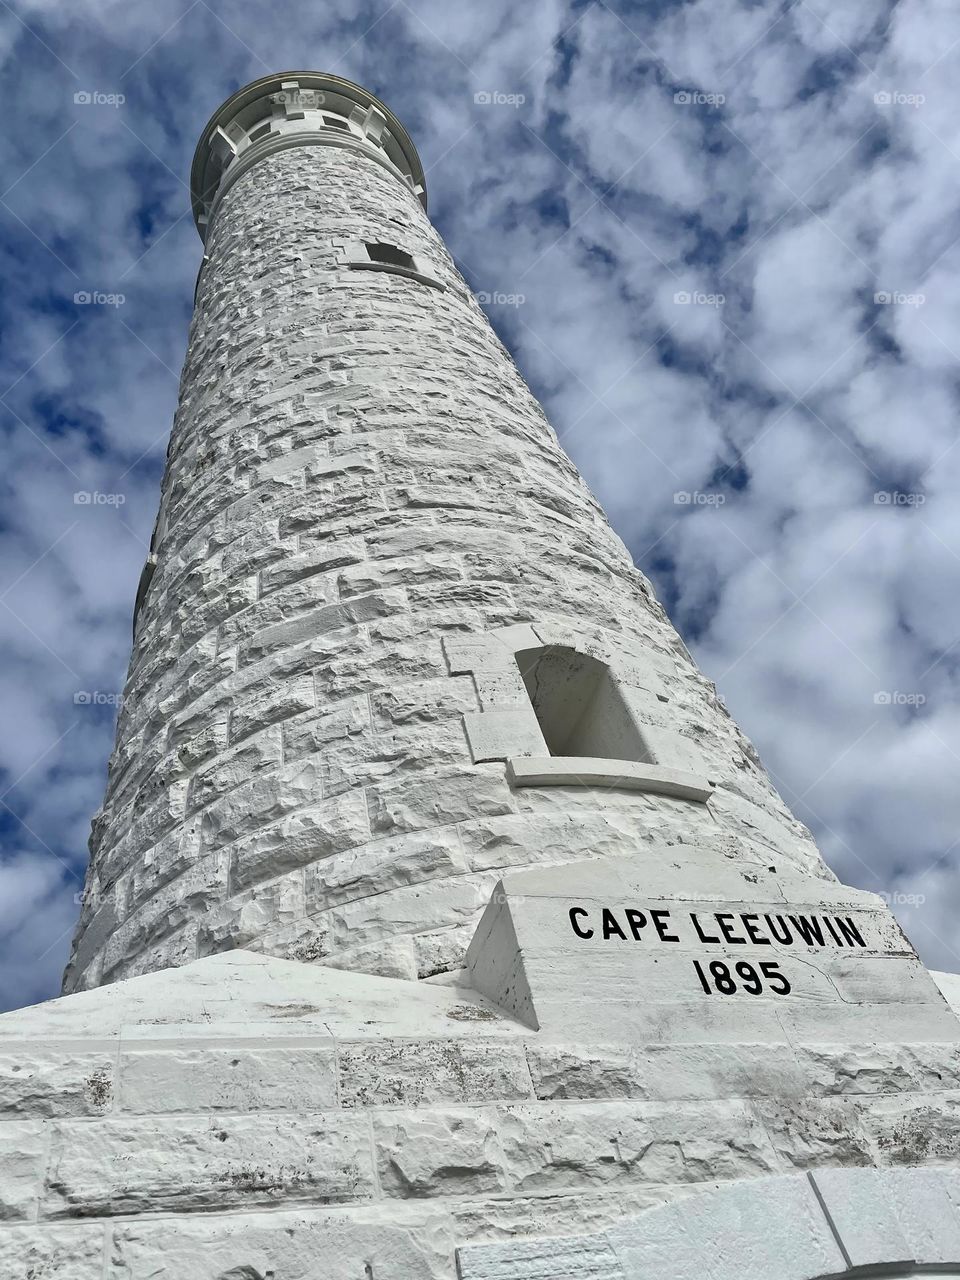 The lighthouse of Cape Leeuwin standing tall into the clouds.